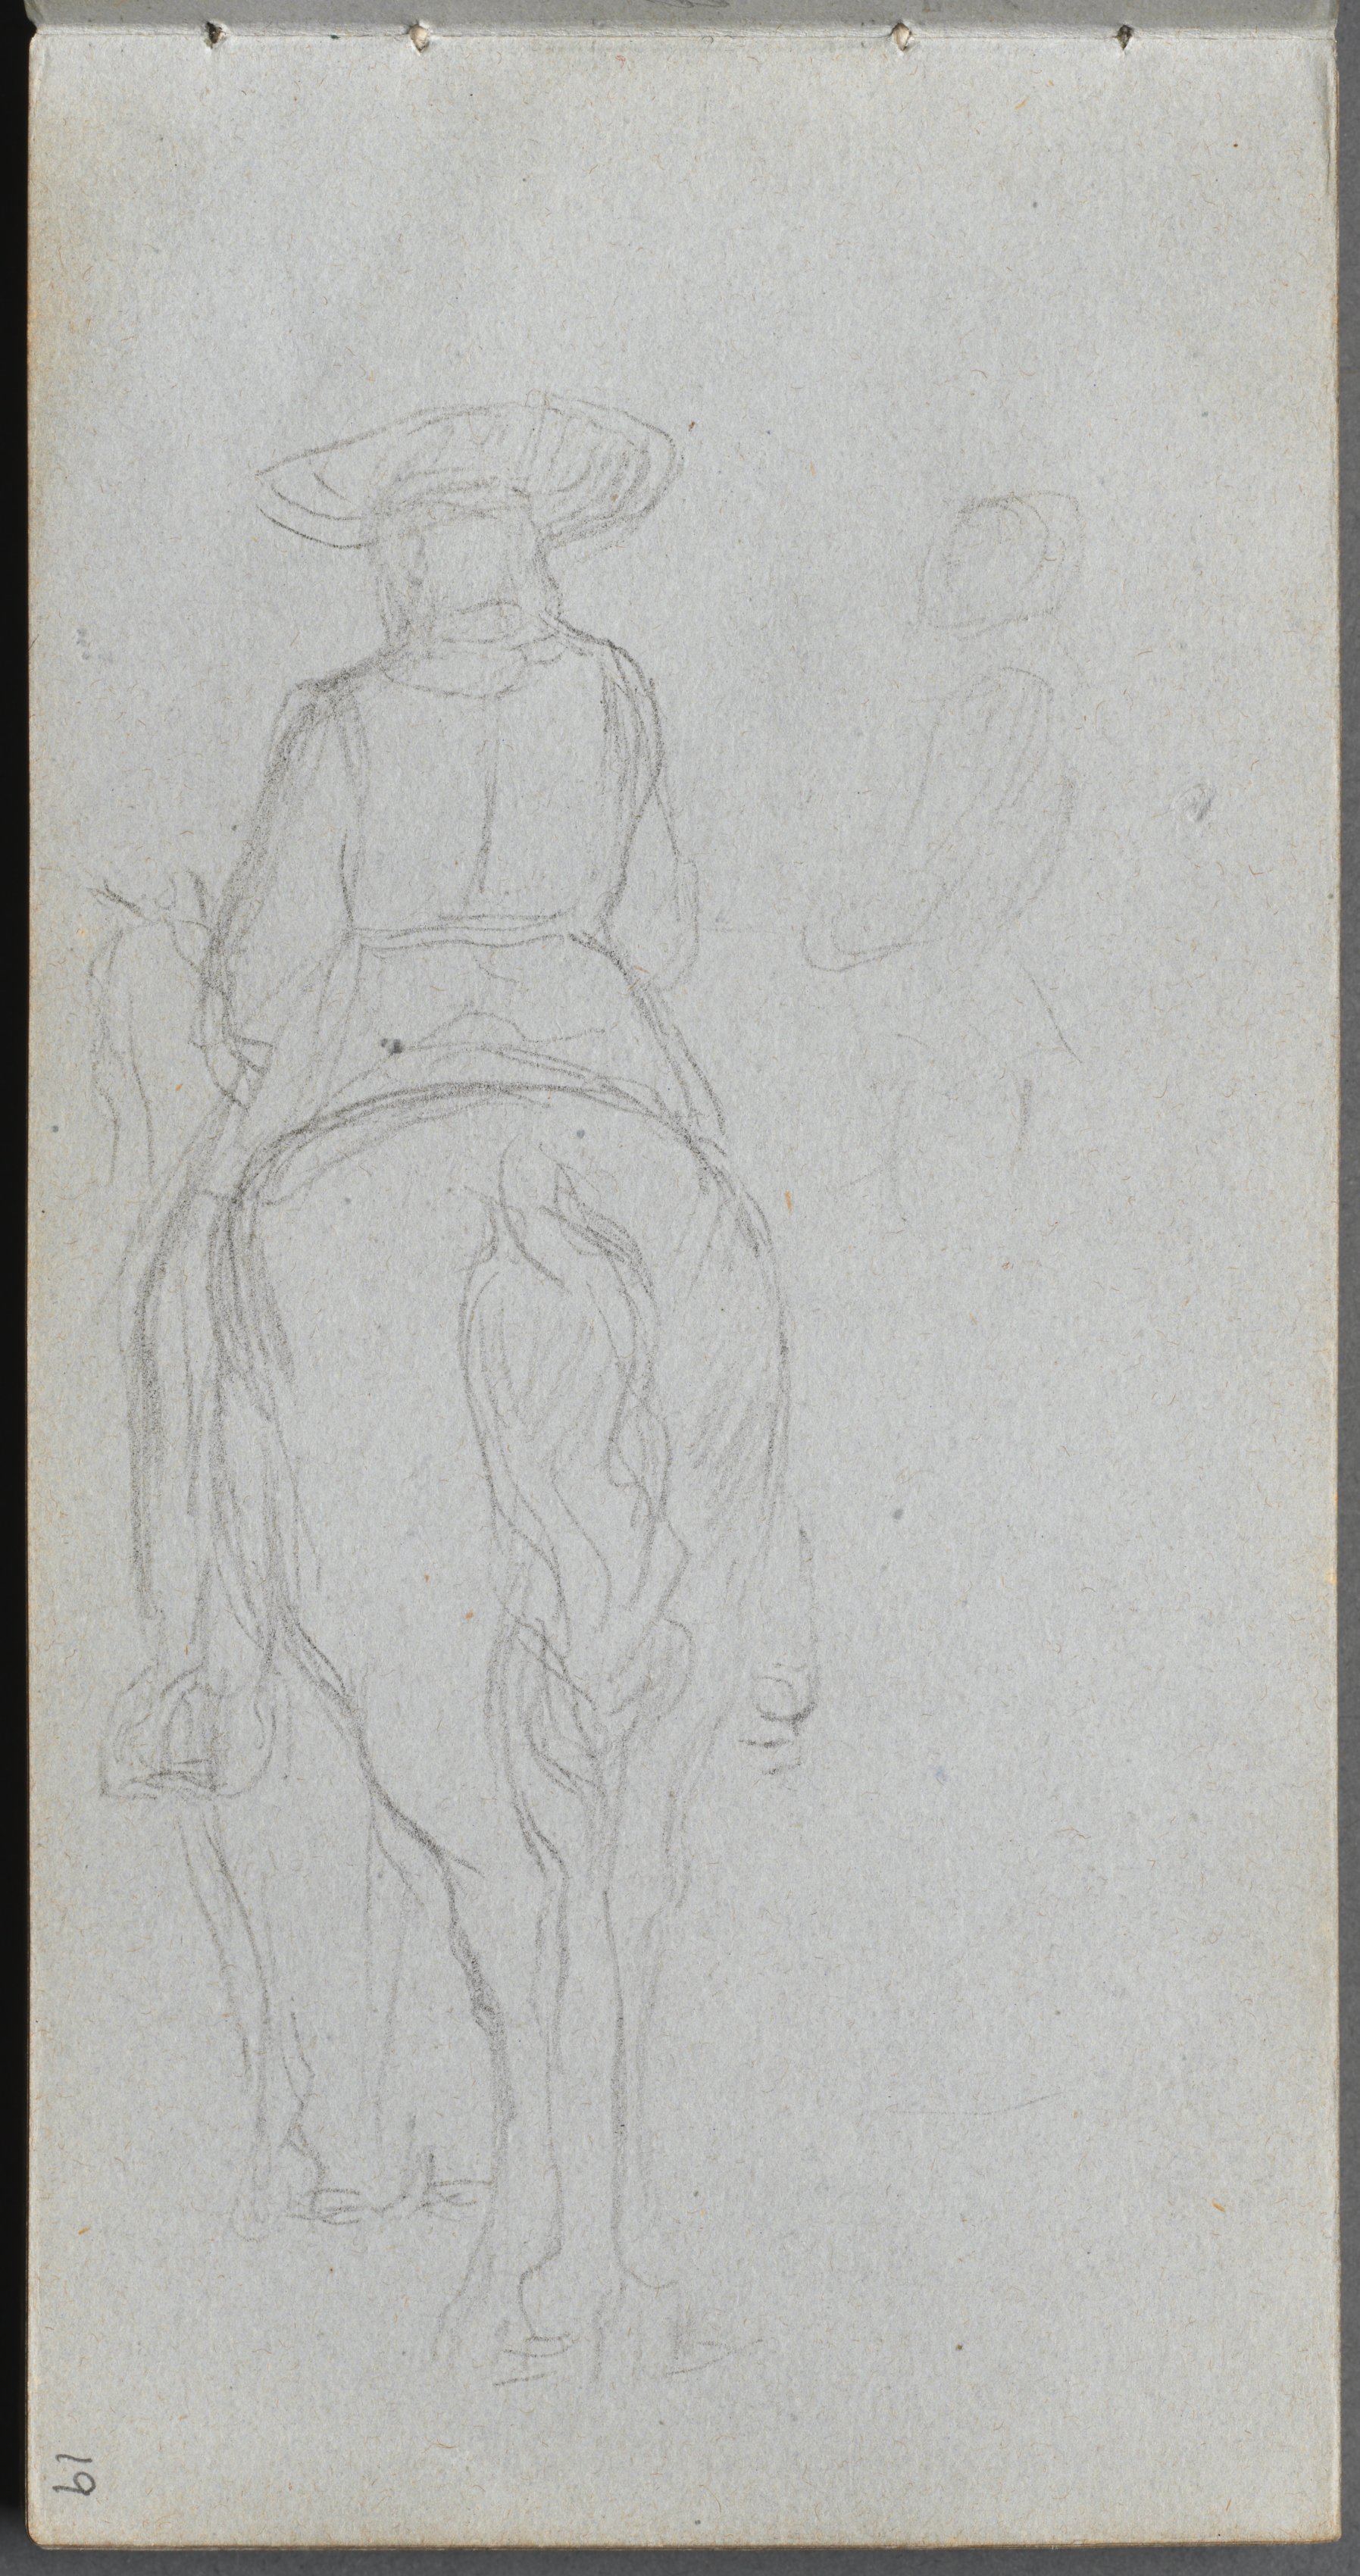 Sketchbook, page 19: Study of a Figure on Horseback seen from behind